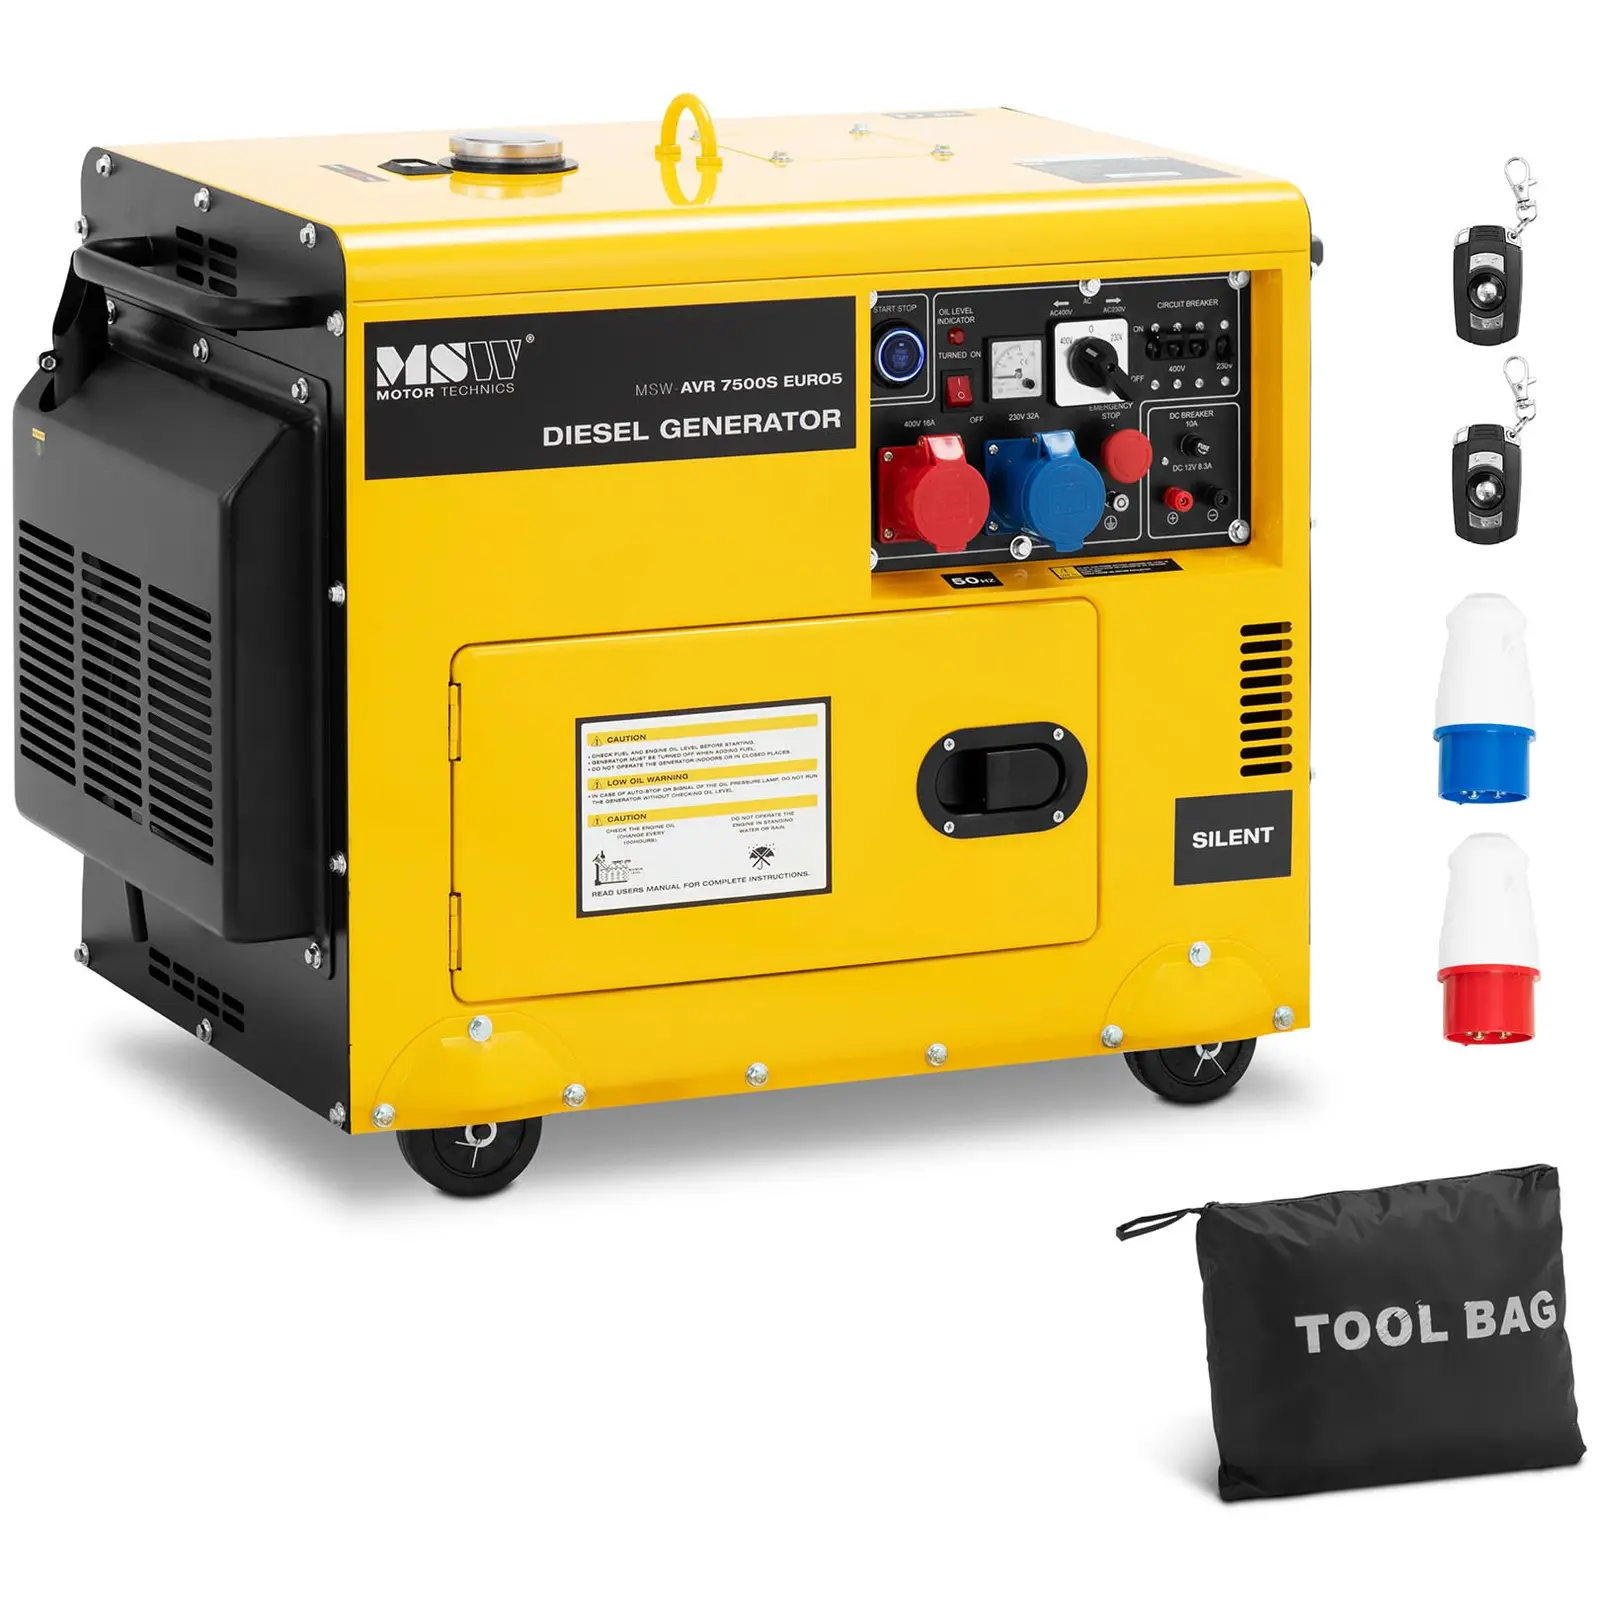 Aggregátor - 6370 / 7500 W - 16 l - 230/400 V - mobil - AVR - Euro 5 | MSW